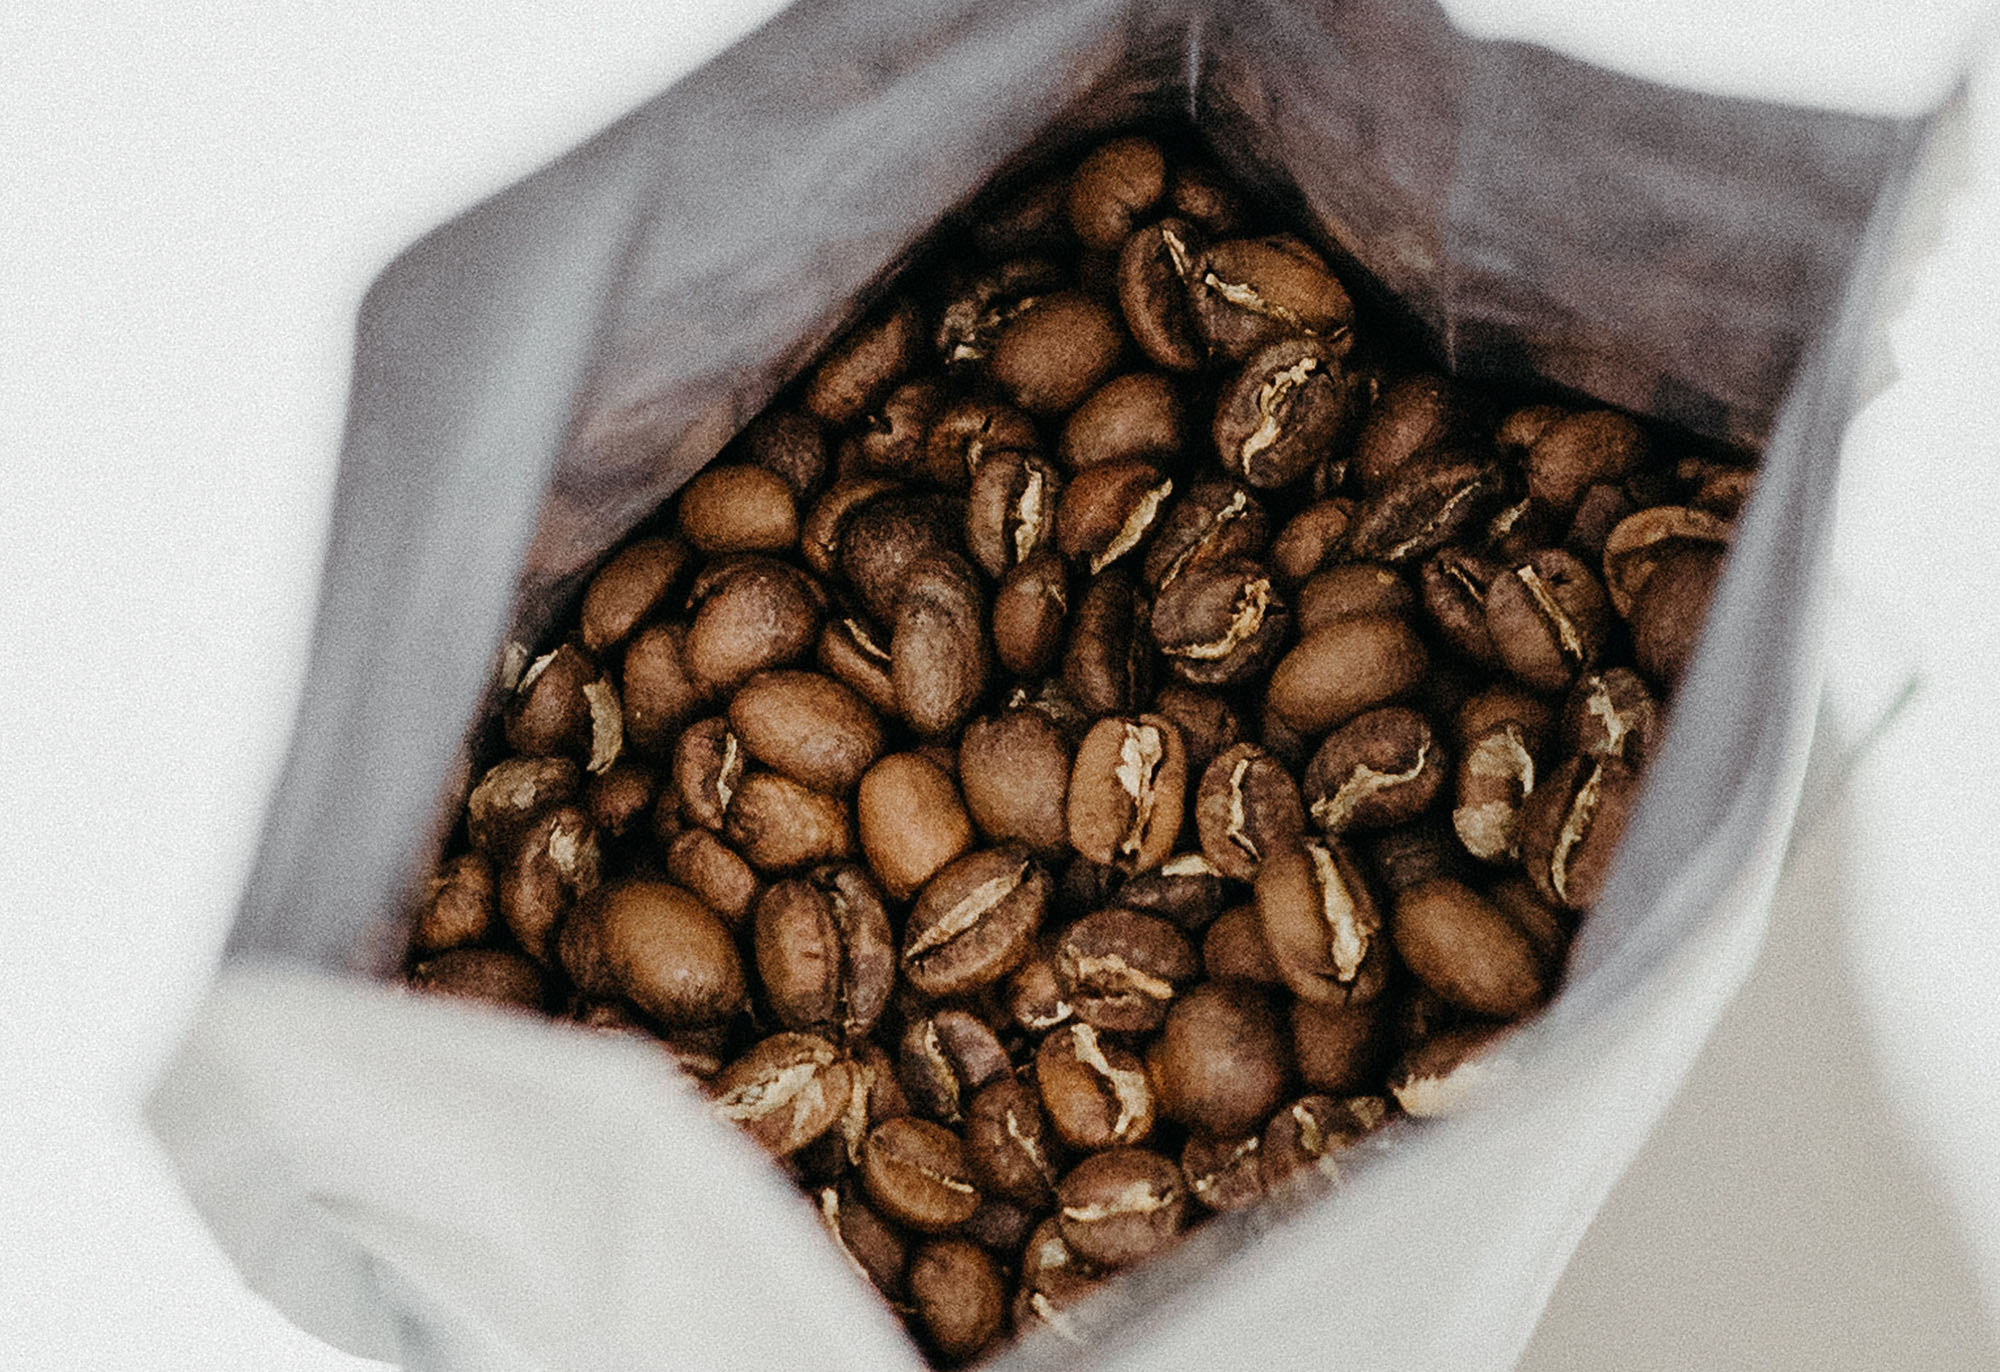 How to Store Coffee Beans?